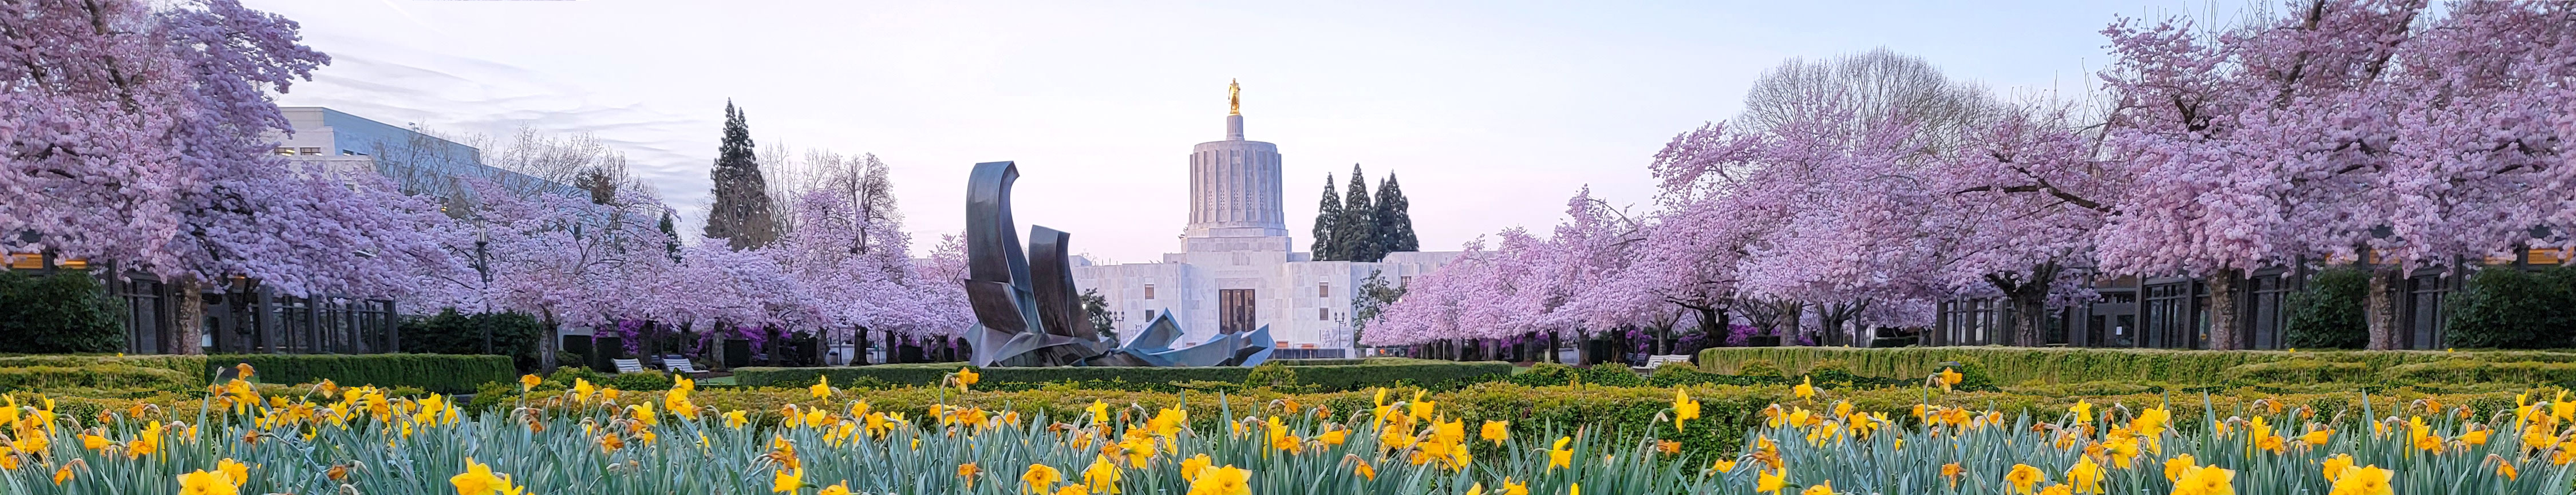 Oregon State Capitol & Cherry Trees Blossoming